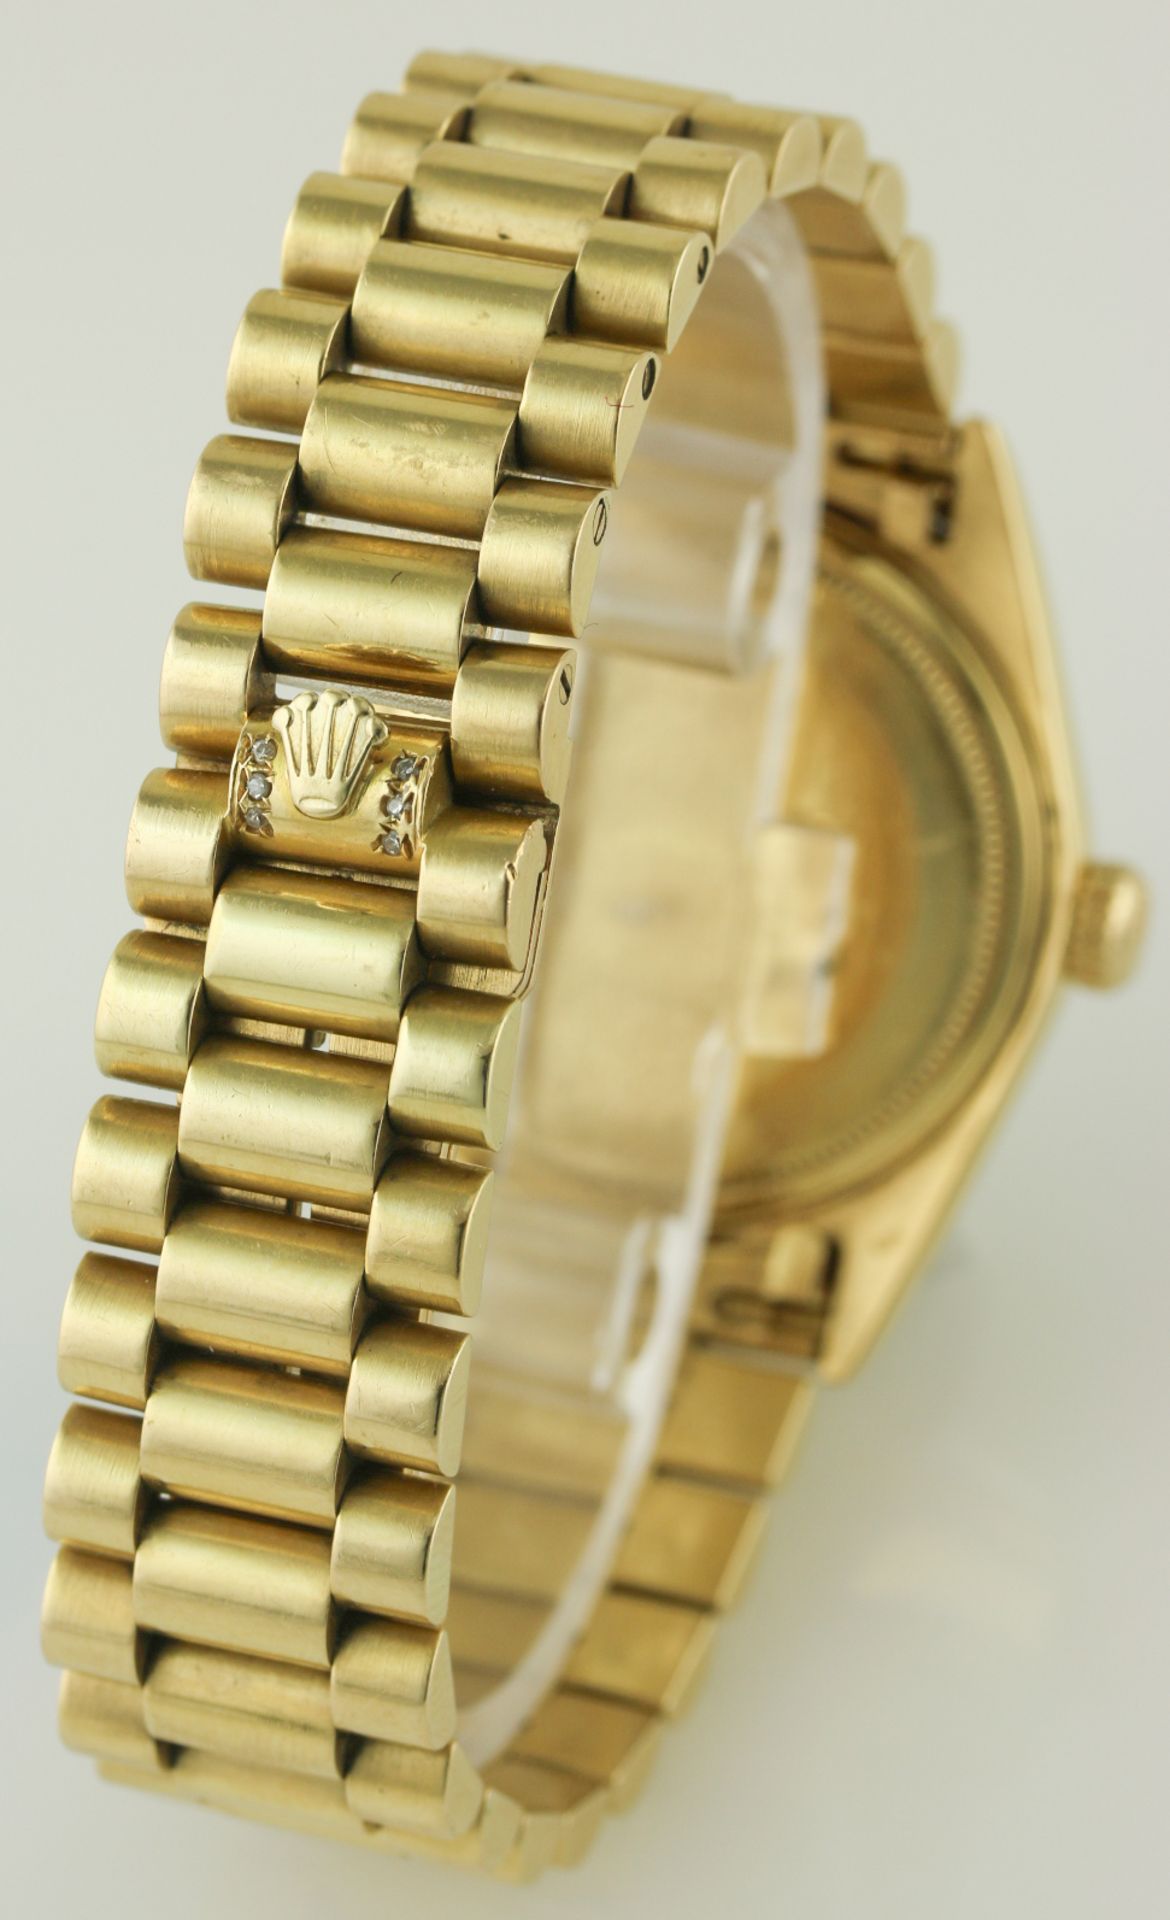 A GENTLEMAN'S 18K SOLID GOLD ROLEX OYSTER PERPETUAL DAY DATE BRACELET WATCH CIRCA 1969, REF. 1803
D: - Image 6 of 8